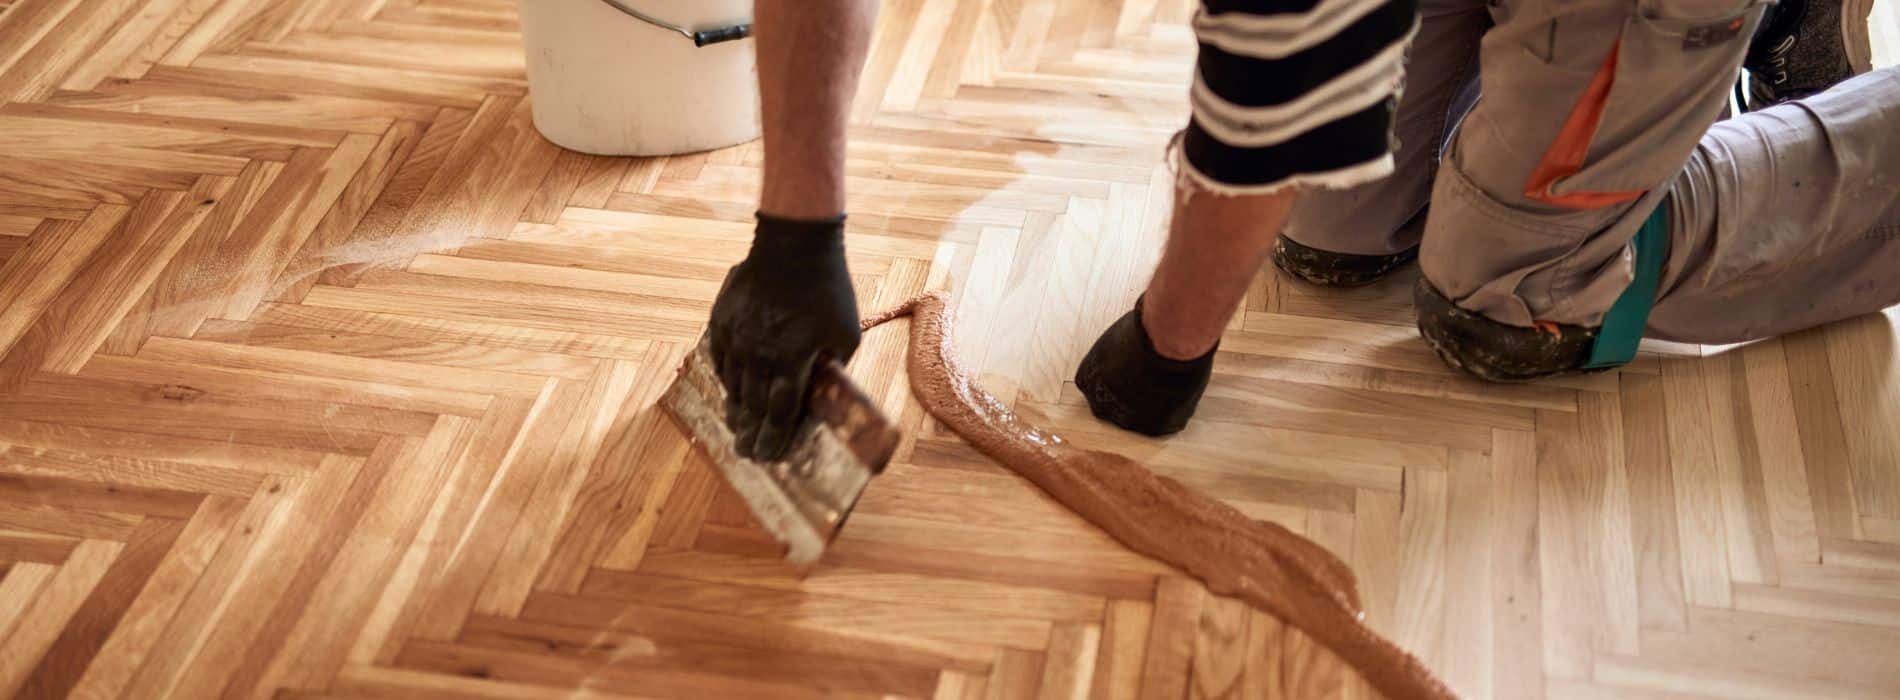  A close-up photograph of a person using a brush on a wooden floor. The individual is likely in the process of applying a finishing coat, such as varnish or sealant, to the wooden surface. The brush strokes can be seen in detail, showcasing the precision and care required to achieve a smooth and even finish. The wood's natural grain and color are visible, providing an overall warm and inviting aesthetic. The image conveys the intricacies of the flooring process, highlighting the attention to detail and expertise required for achieving beautiful and lasting results.